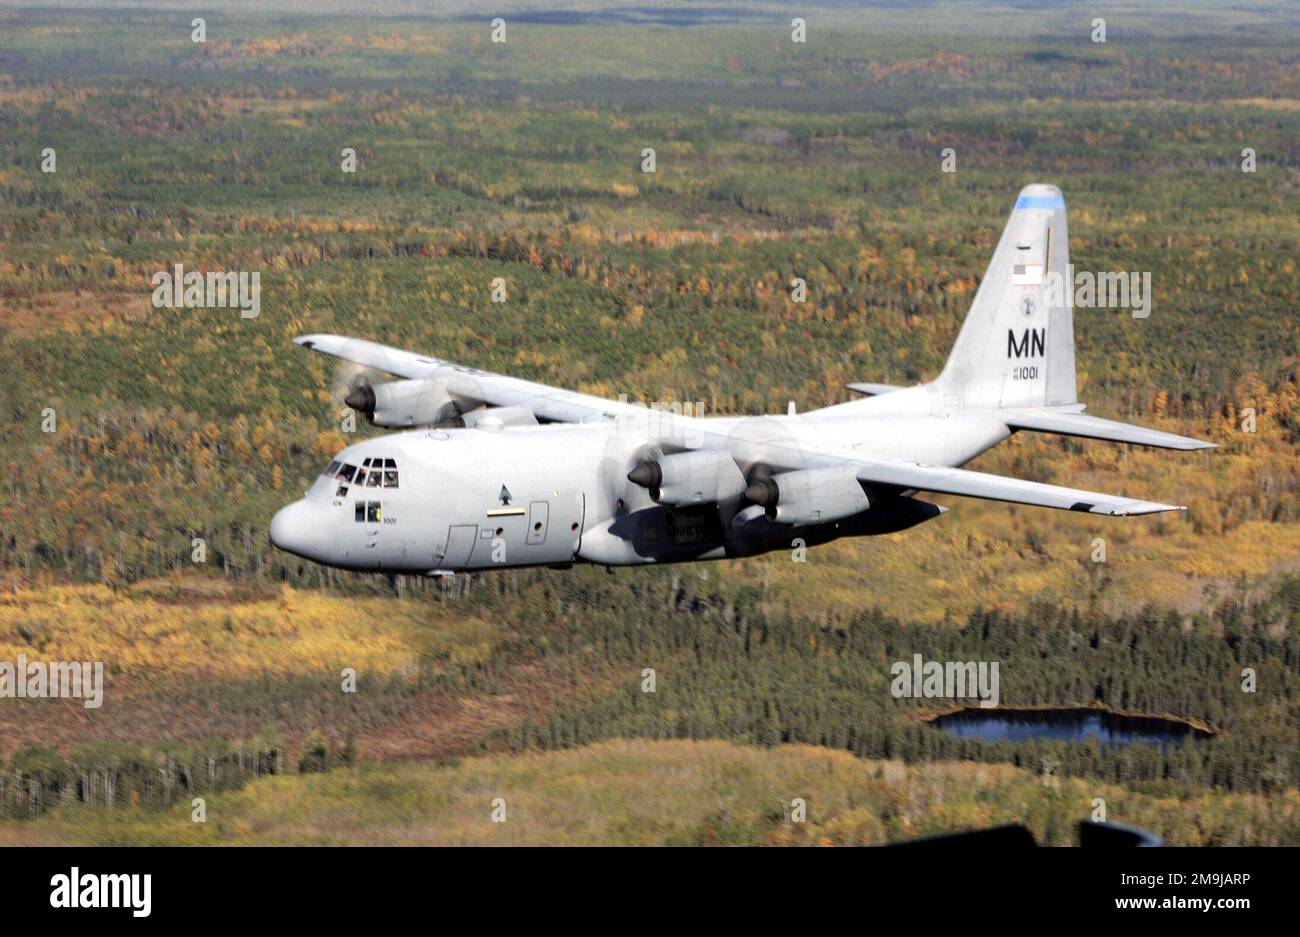 A US Air Force (USAF) Minnesota (MN) Air National Guard (ANG) C-130H3 Hercules aircraft assigned to the 133rd Airlift Wing (AW), flies over the Minnesota countryside near Lake Superior. Base: Duluth State: Minnesota (MN) Country: United States Of America (USA) Stock Photo